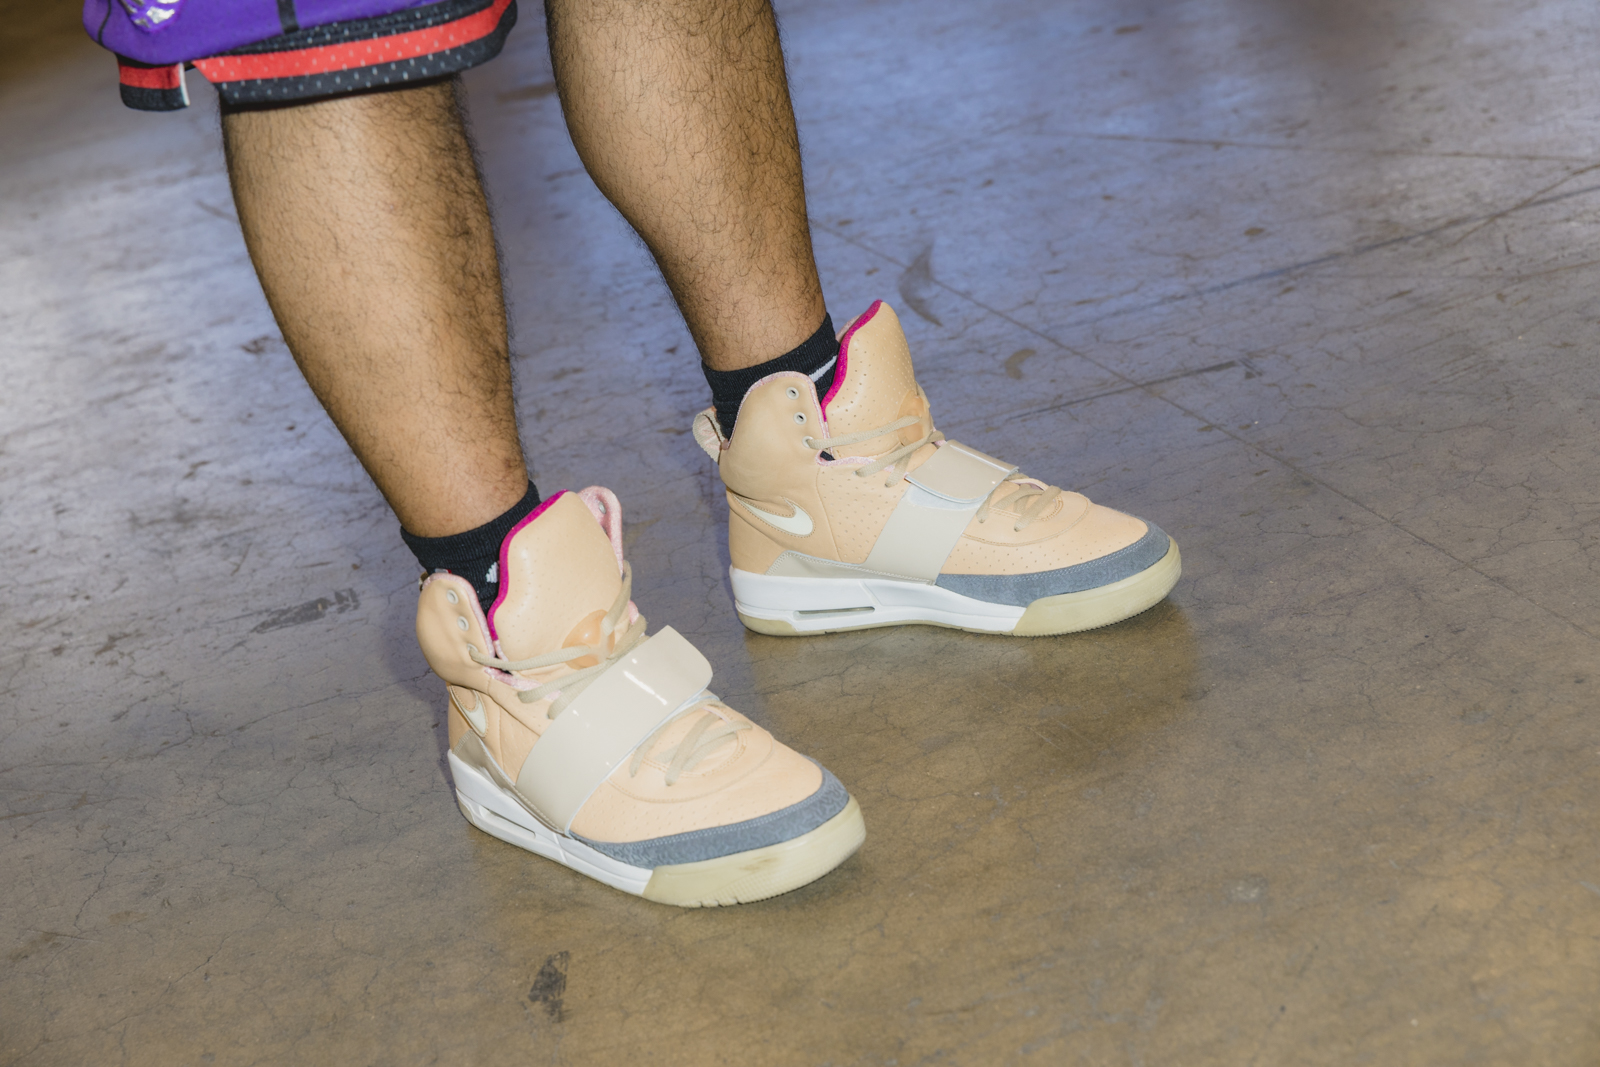 ComplexCon Chicago Sneakers Nike Air Yeezy 1 Net